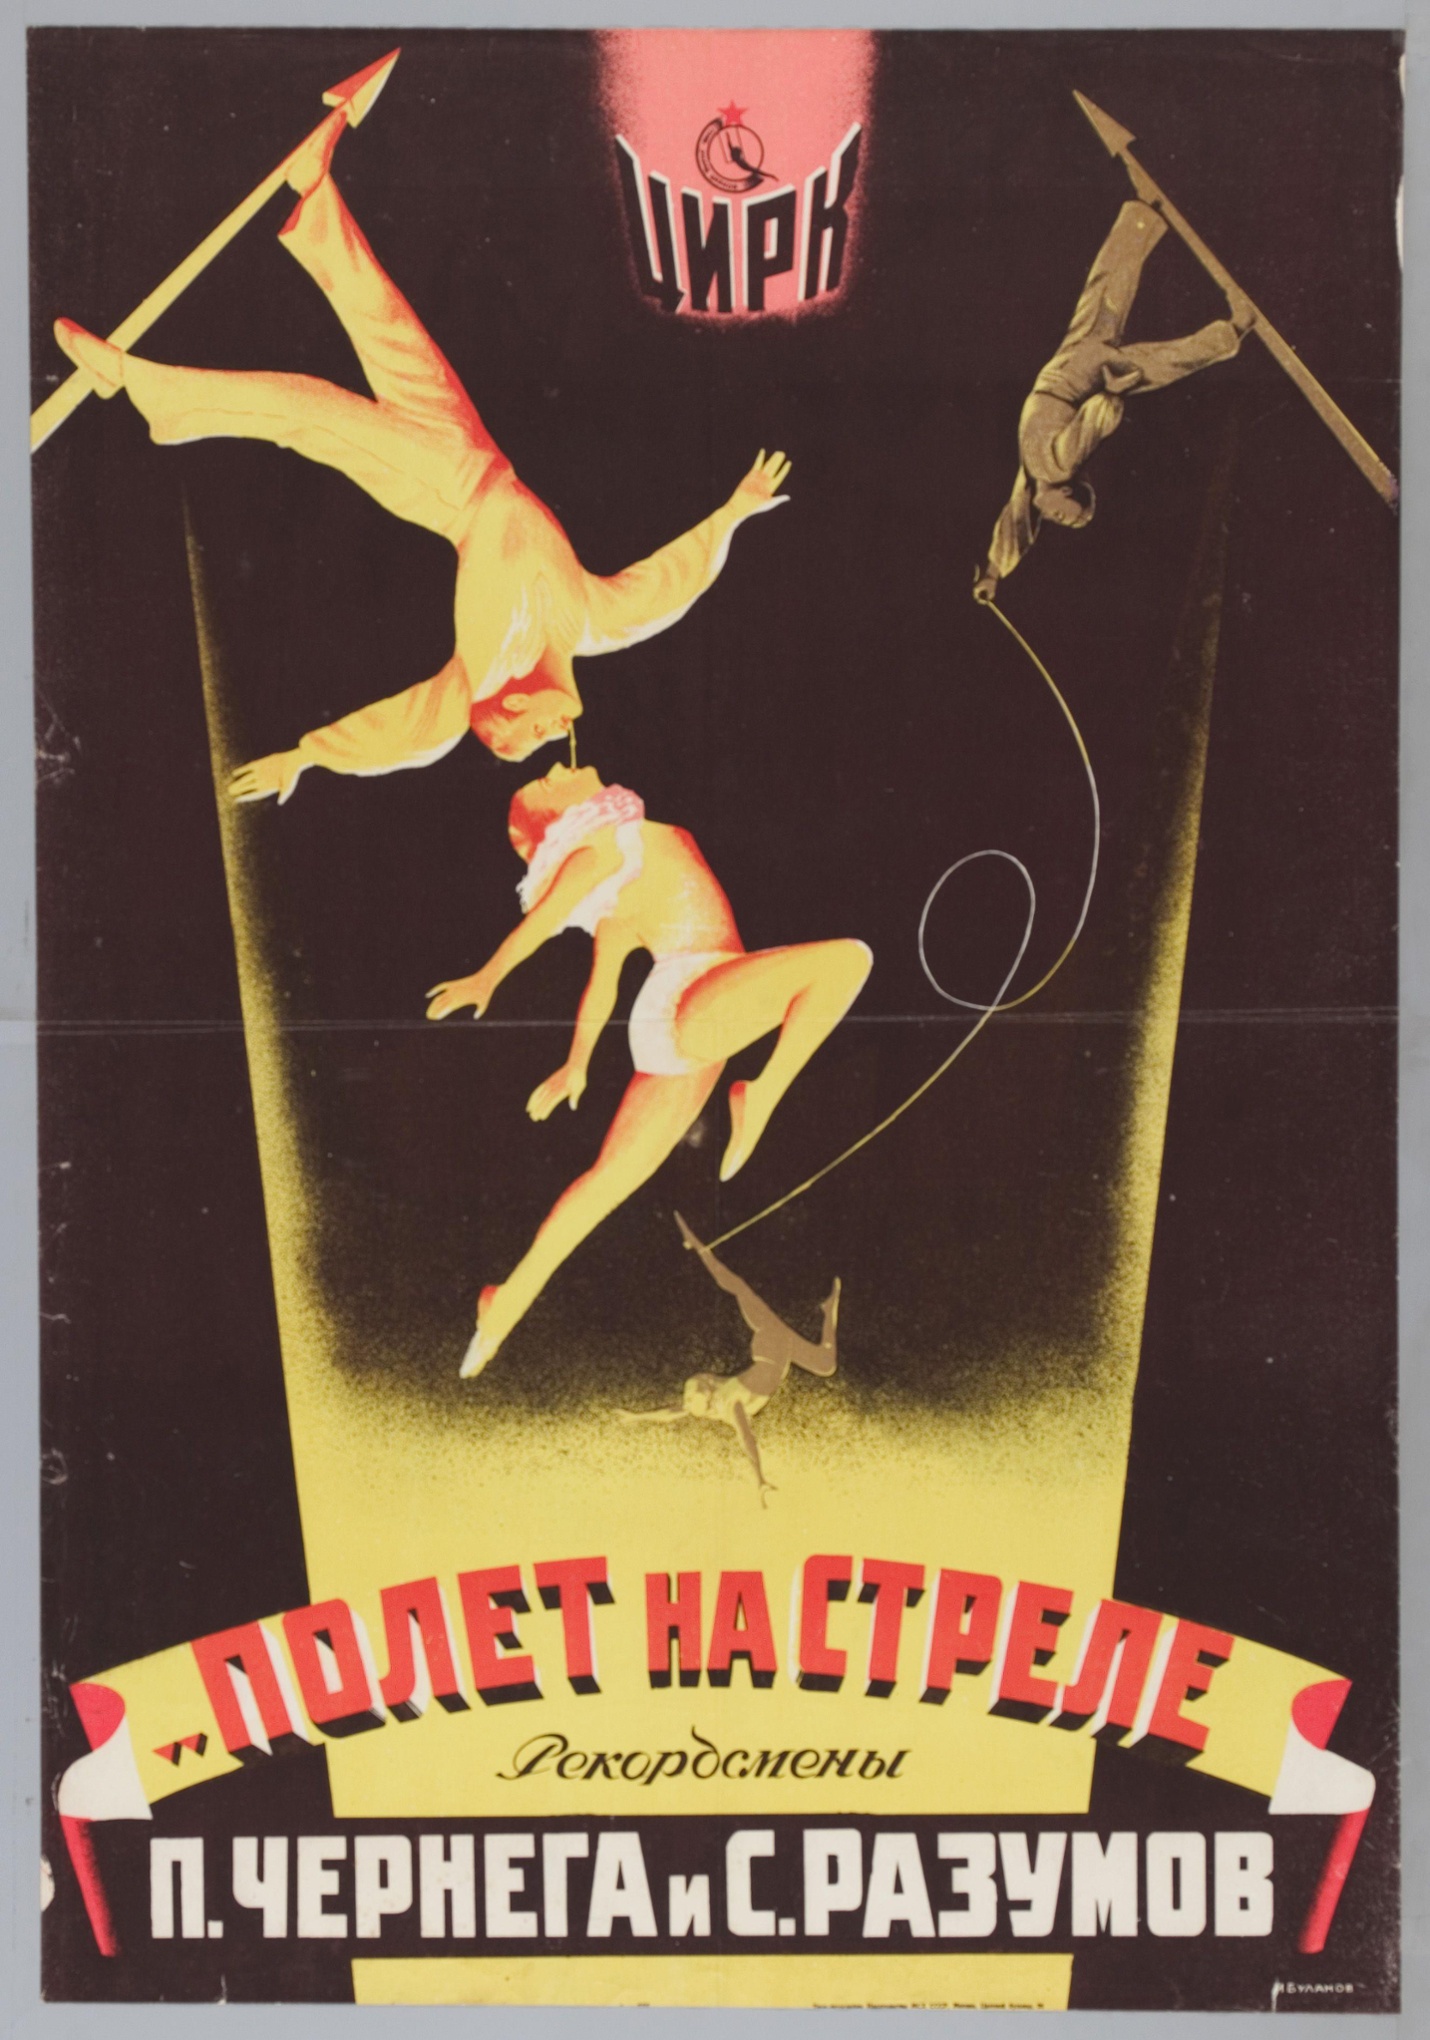 Vintage circus posters - in pictures | Art and design | The Guardian